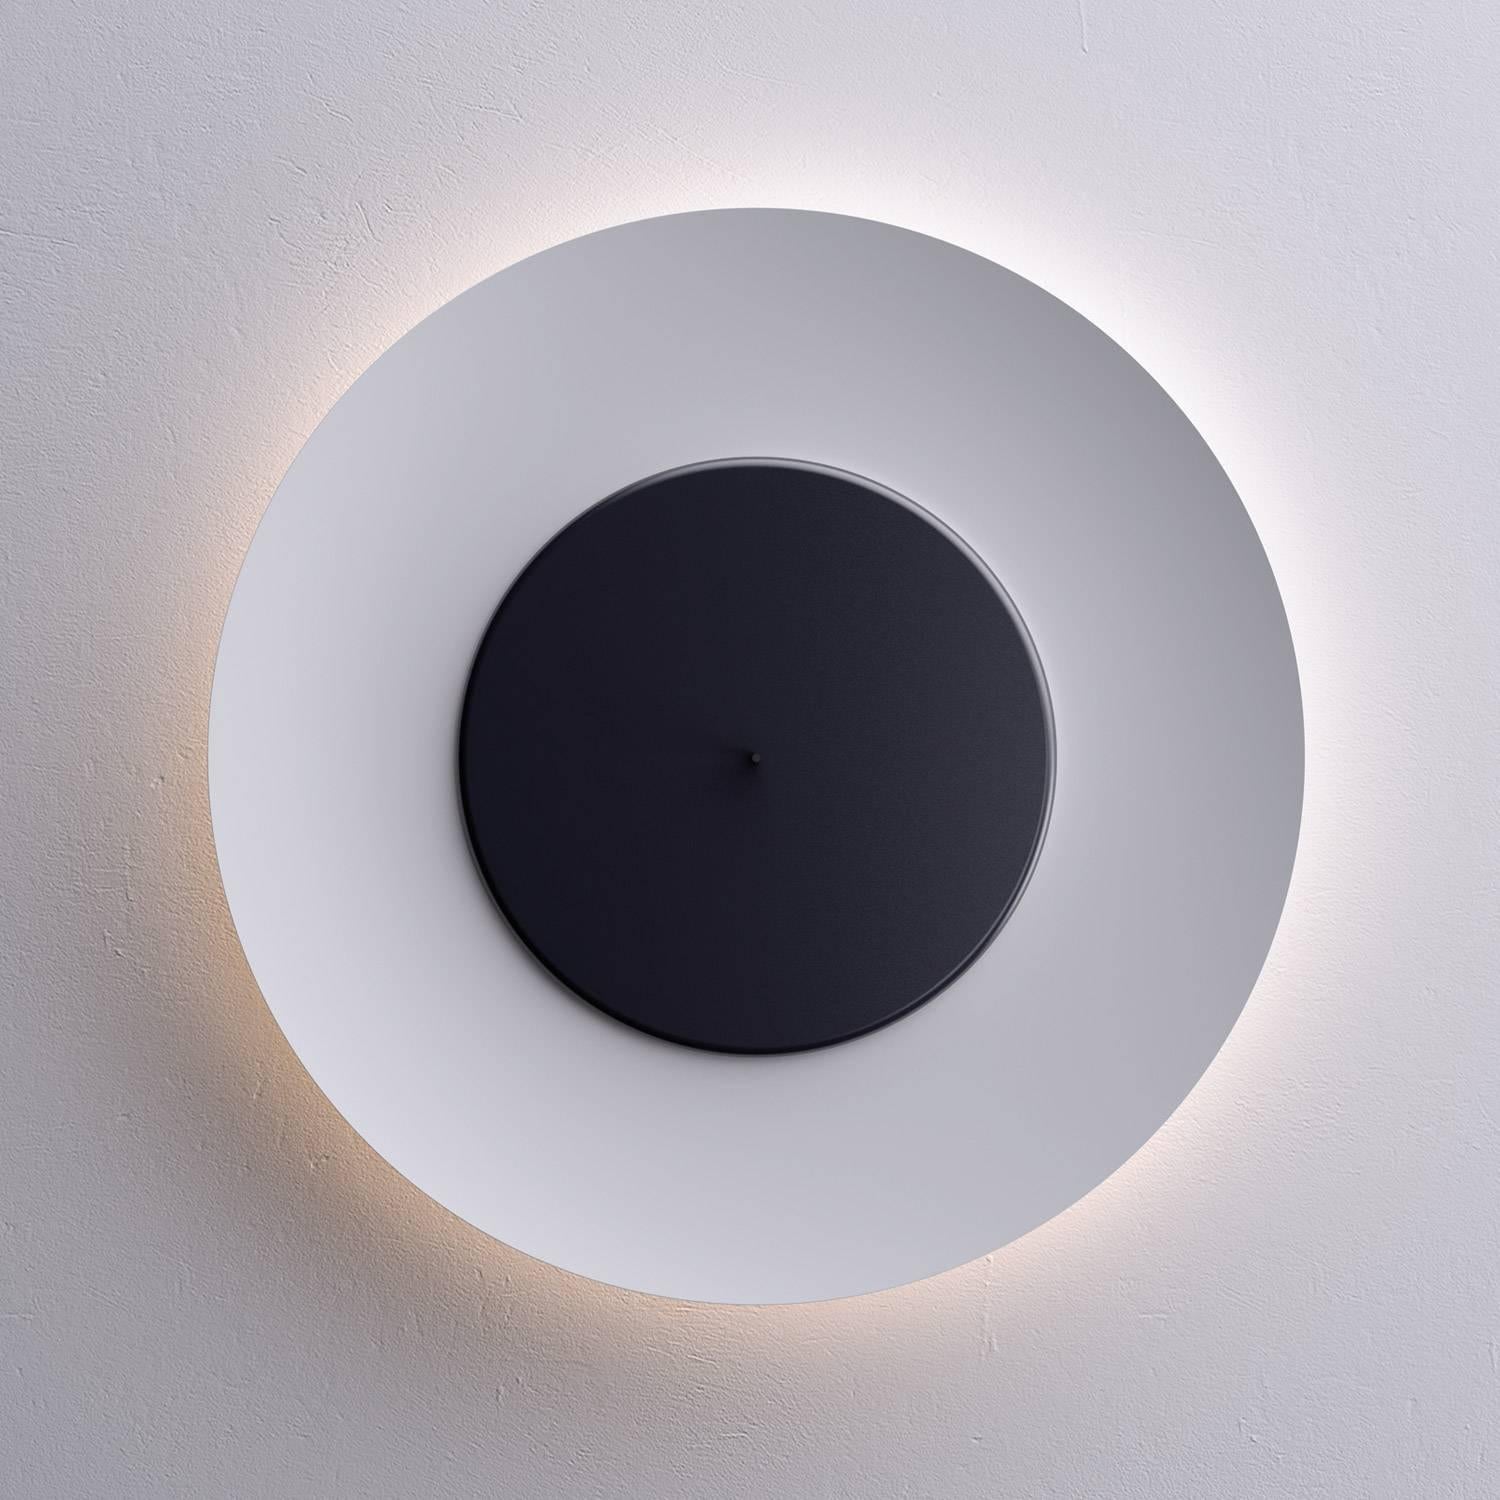 Fontana Arte 'Lunaire' wall or ceiling Lights. Designed by Ferre´ol Babin.

Price is per item for both all white and black/white models. Please specify color when ordering.

Lunaire is a wall and ceiling lamp with a surprising light effect,